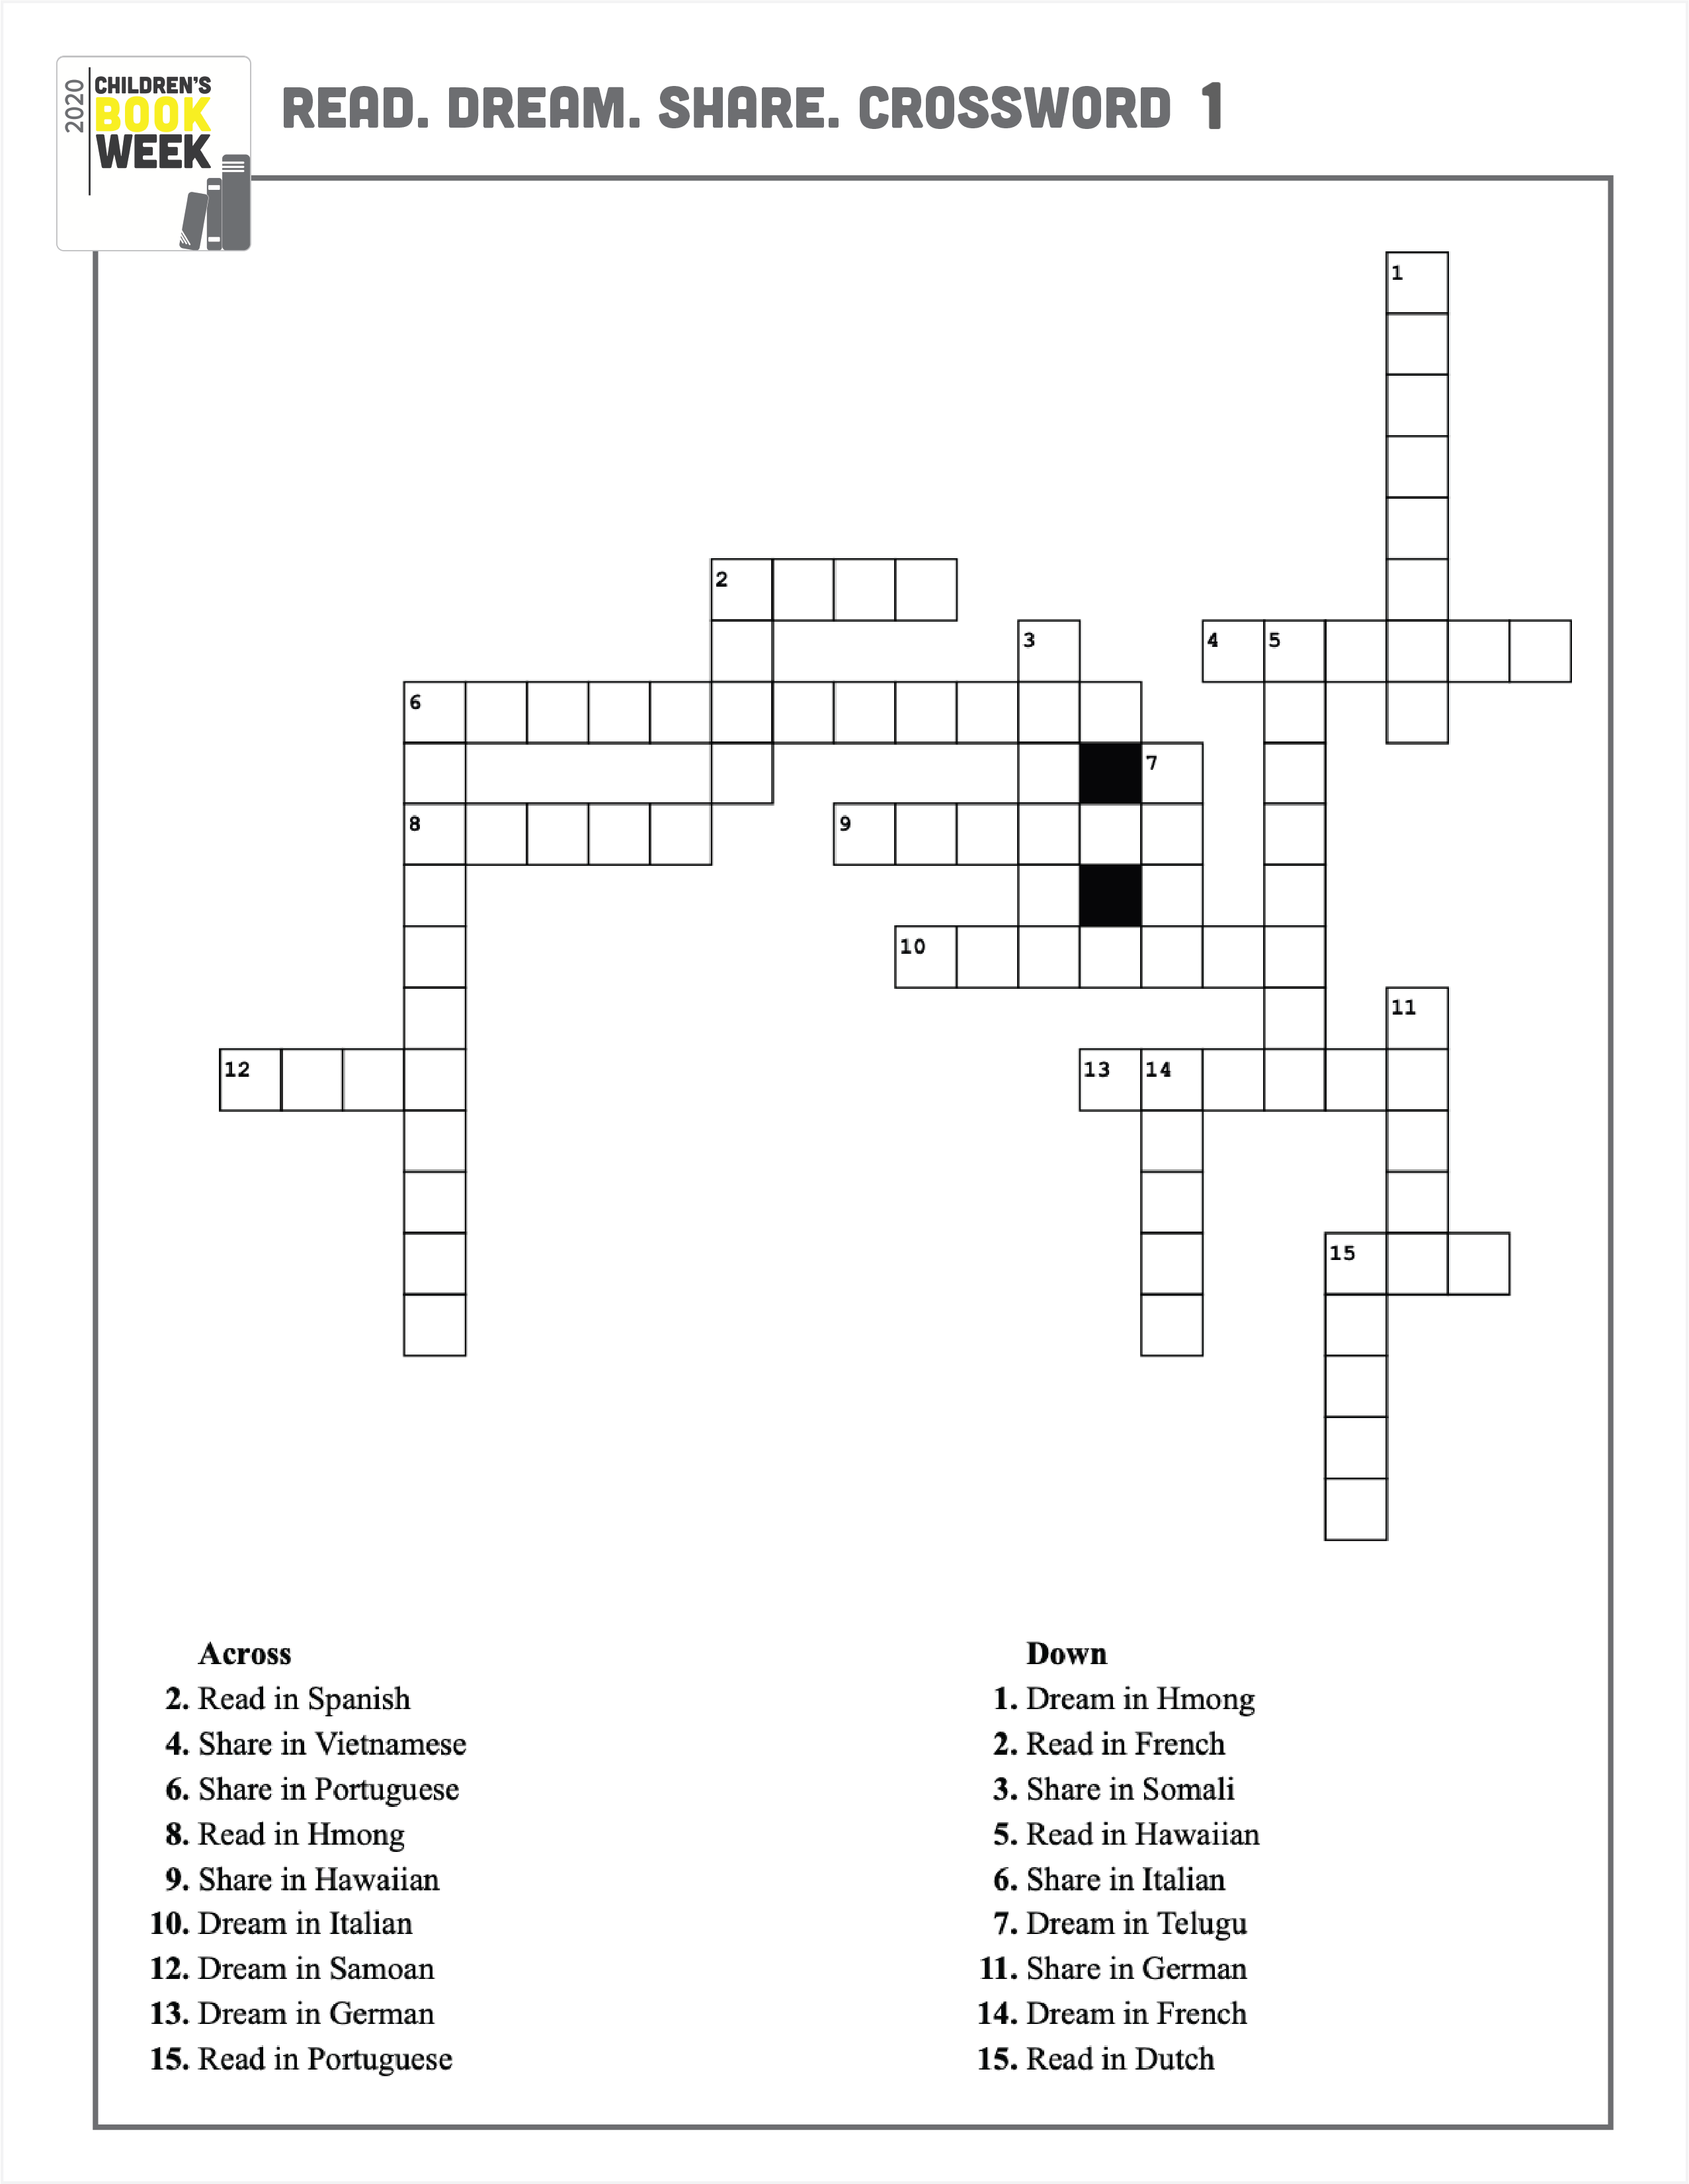 Crossword 1 Page